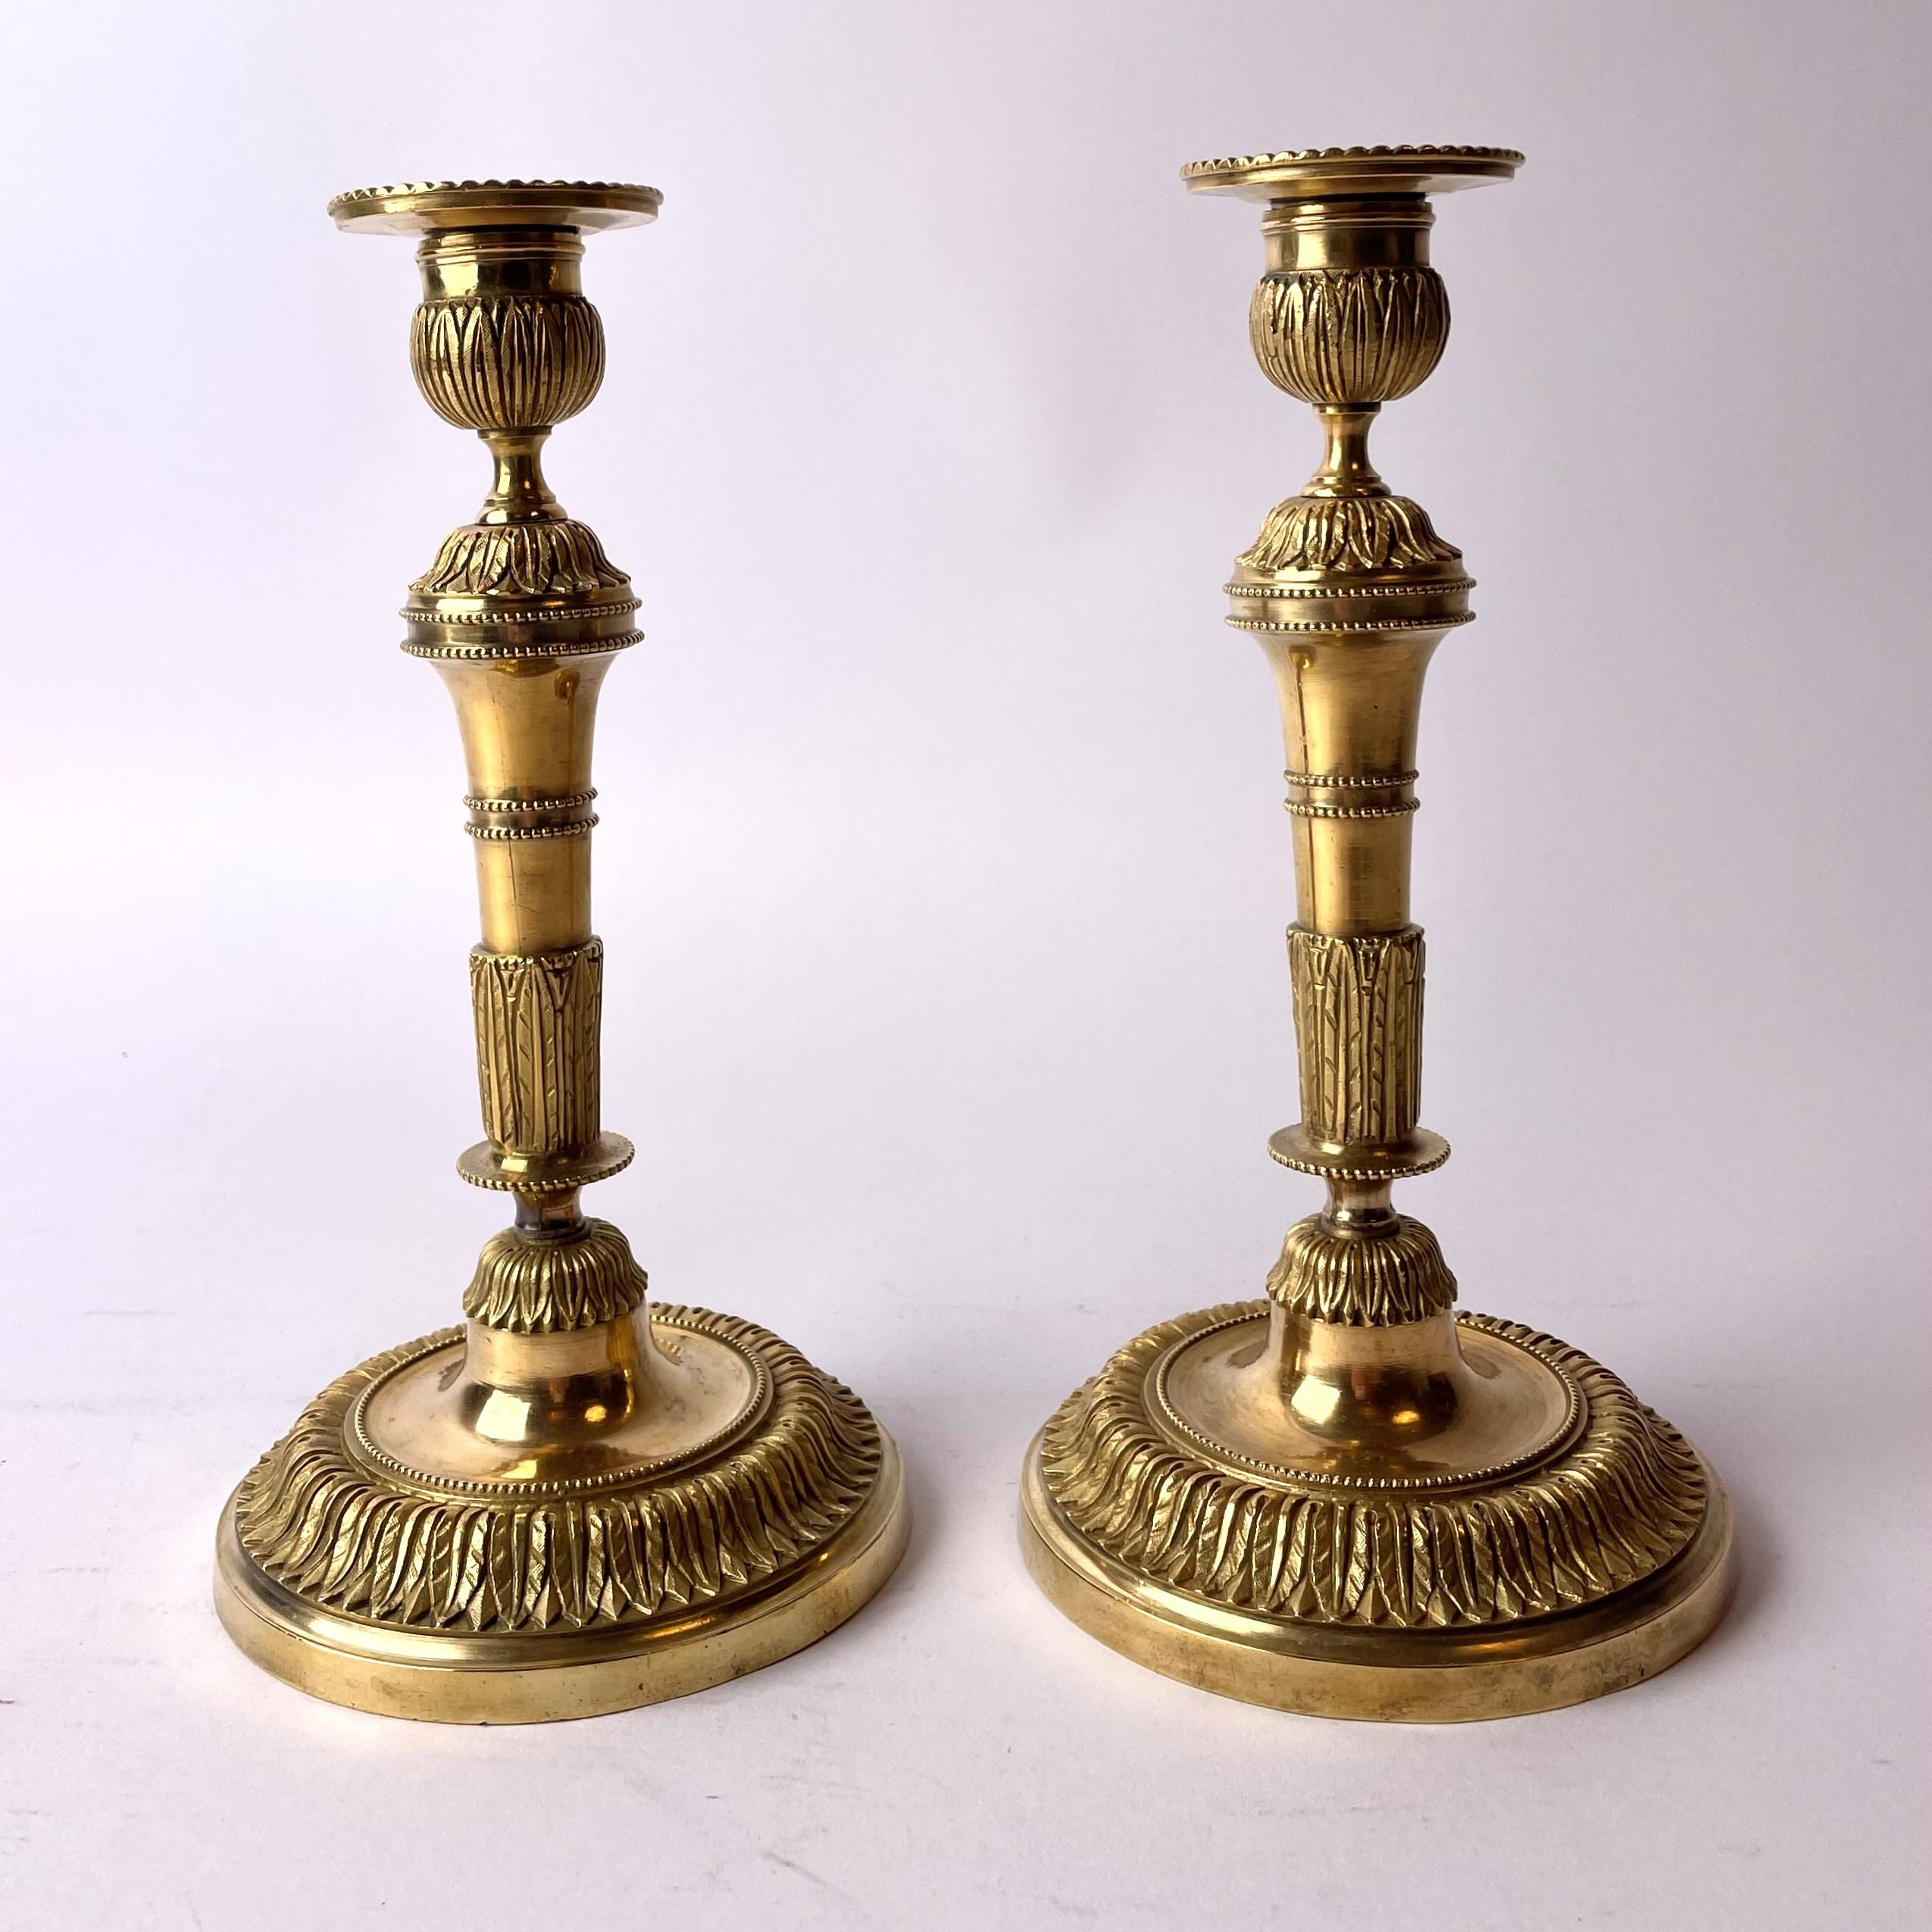 A pair of rare and beautiful French Directoire candlesticks in gilt bronze from the late 18th century.

In very good antique condition.

Marked in the lower part of the foot with 